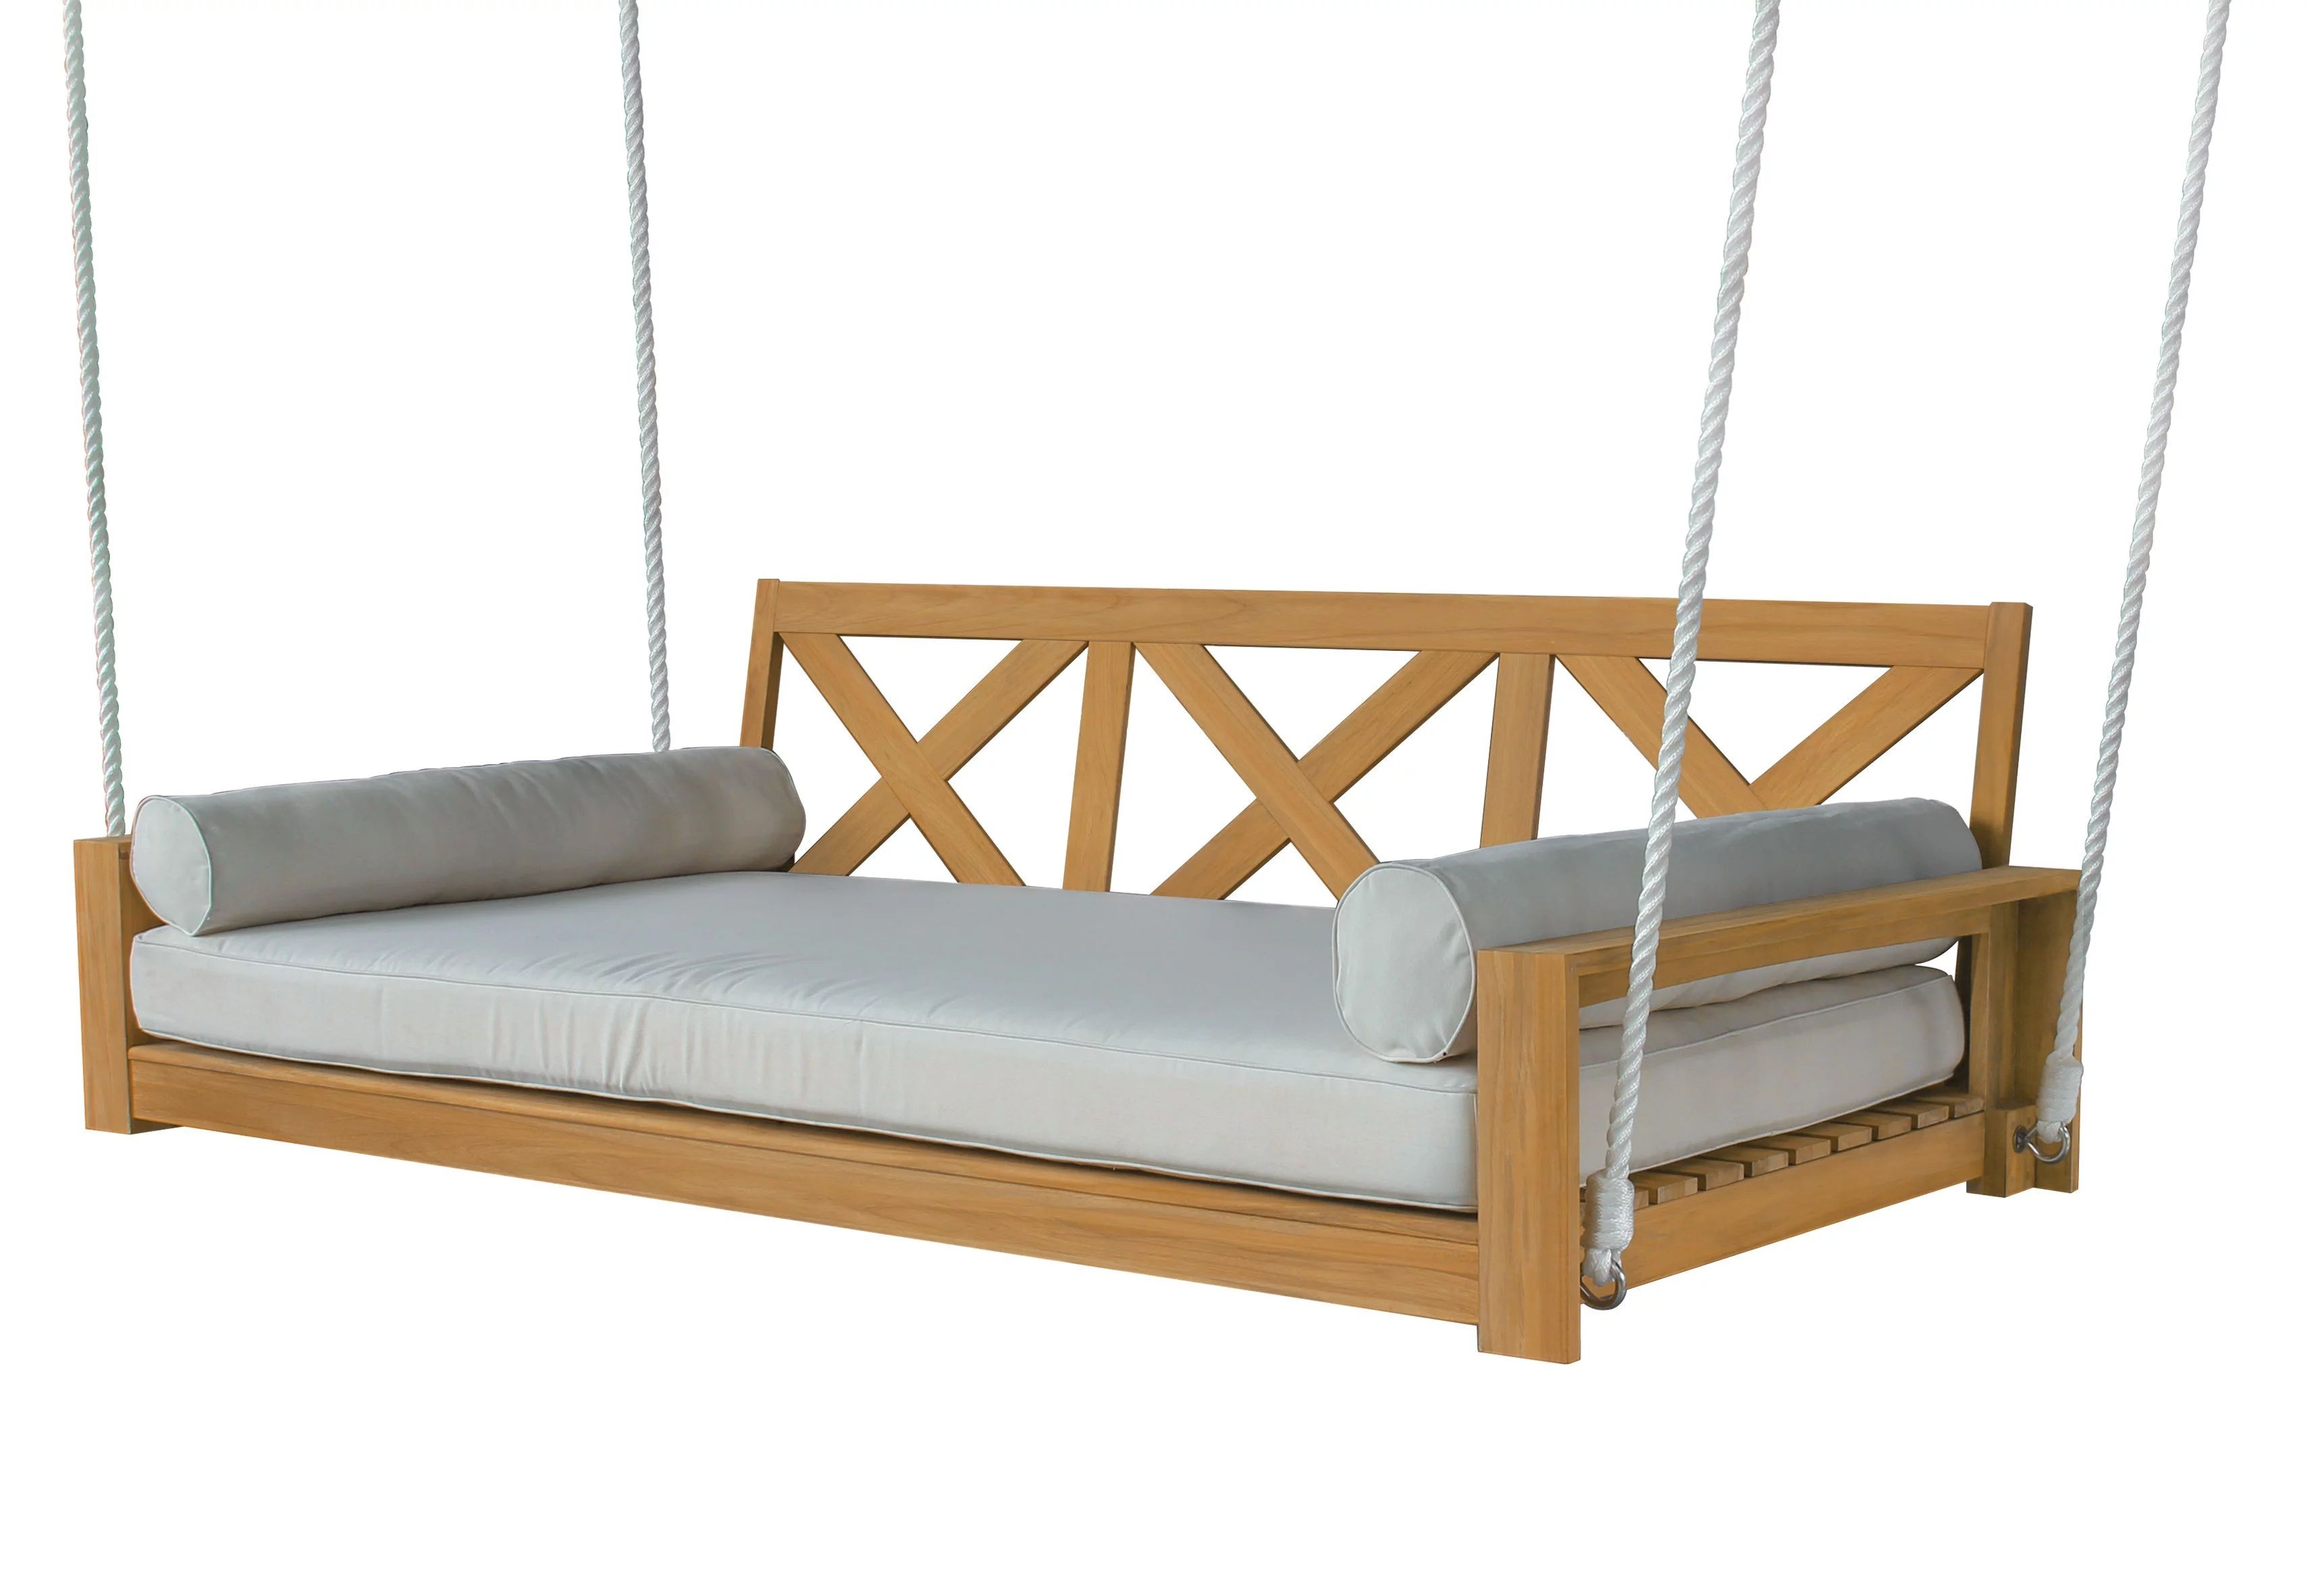 Better Homes & Gardens Ashbrook 3-Persons Porch Swing with Cushions by Dave & Jenny Marrs | Walmart (US)